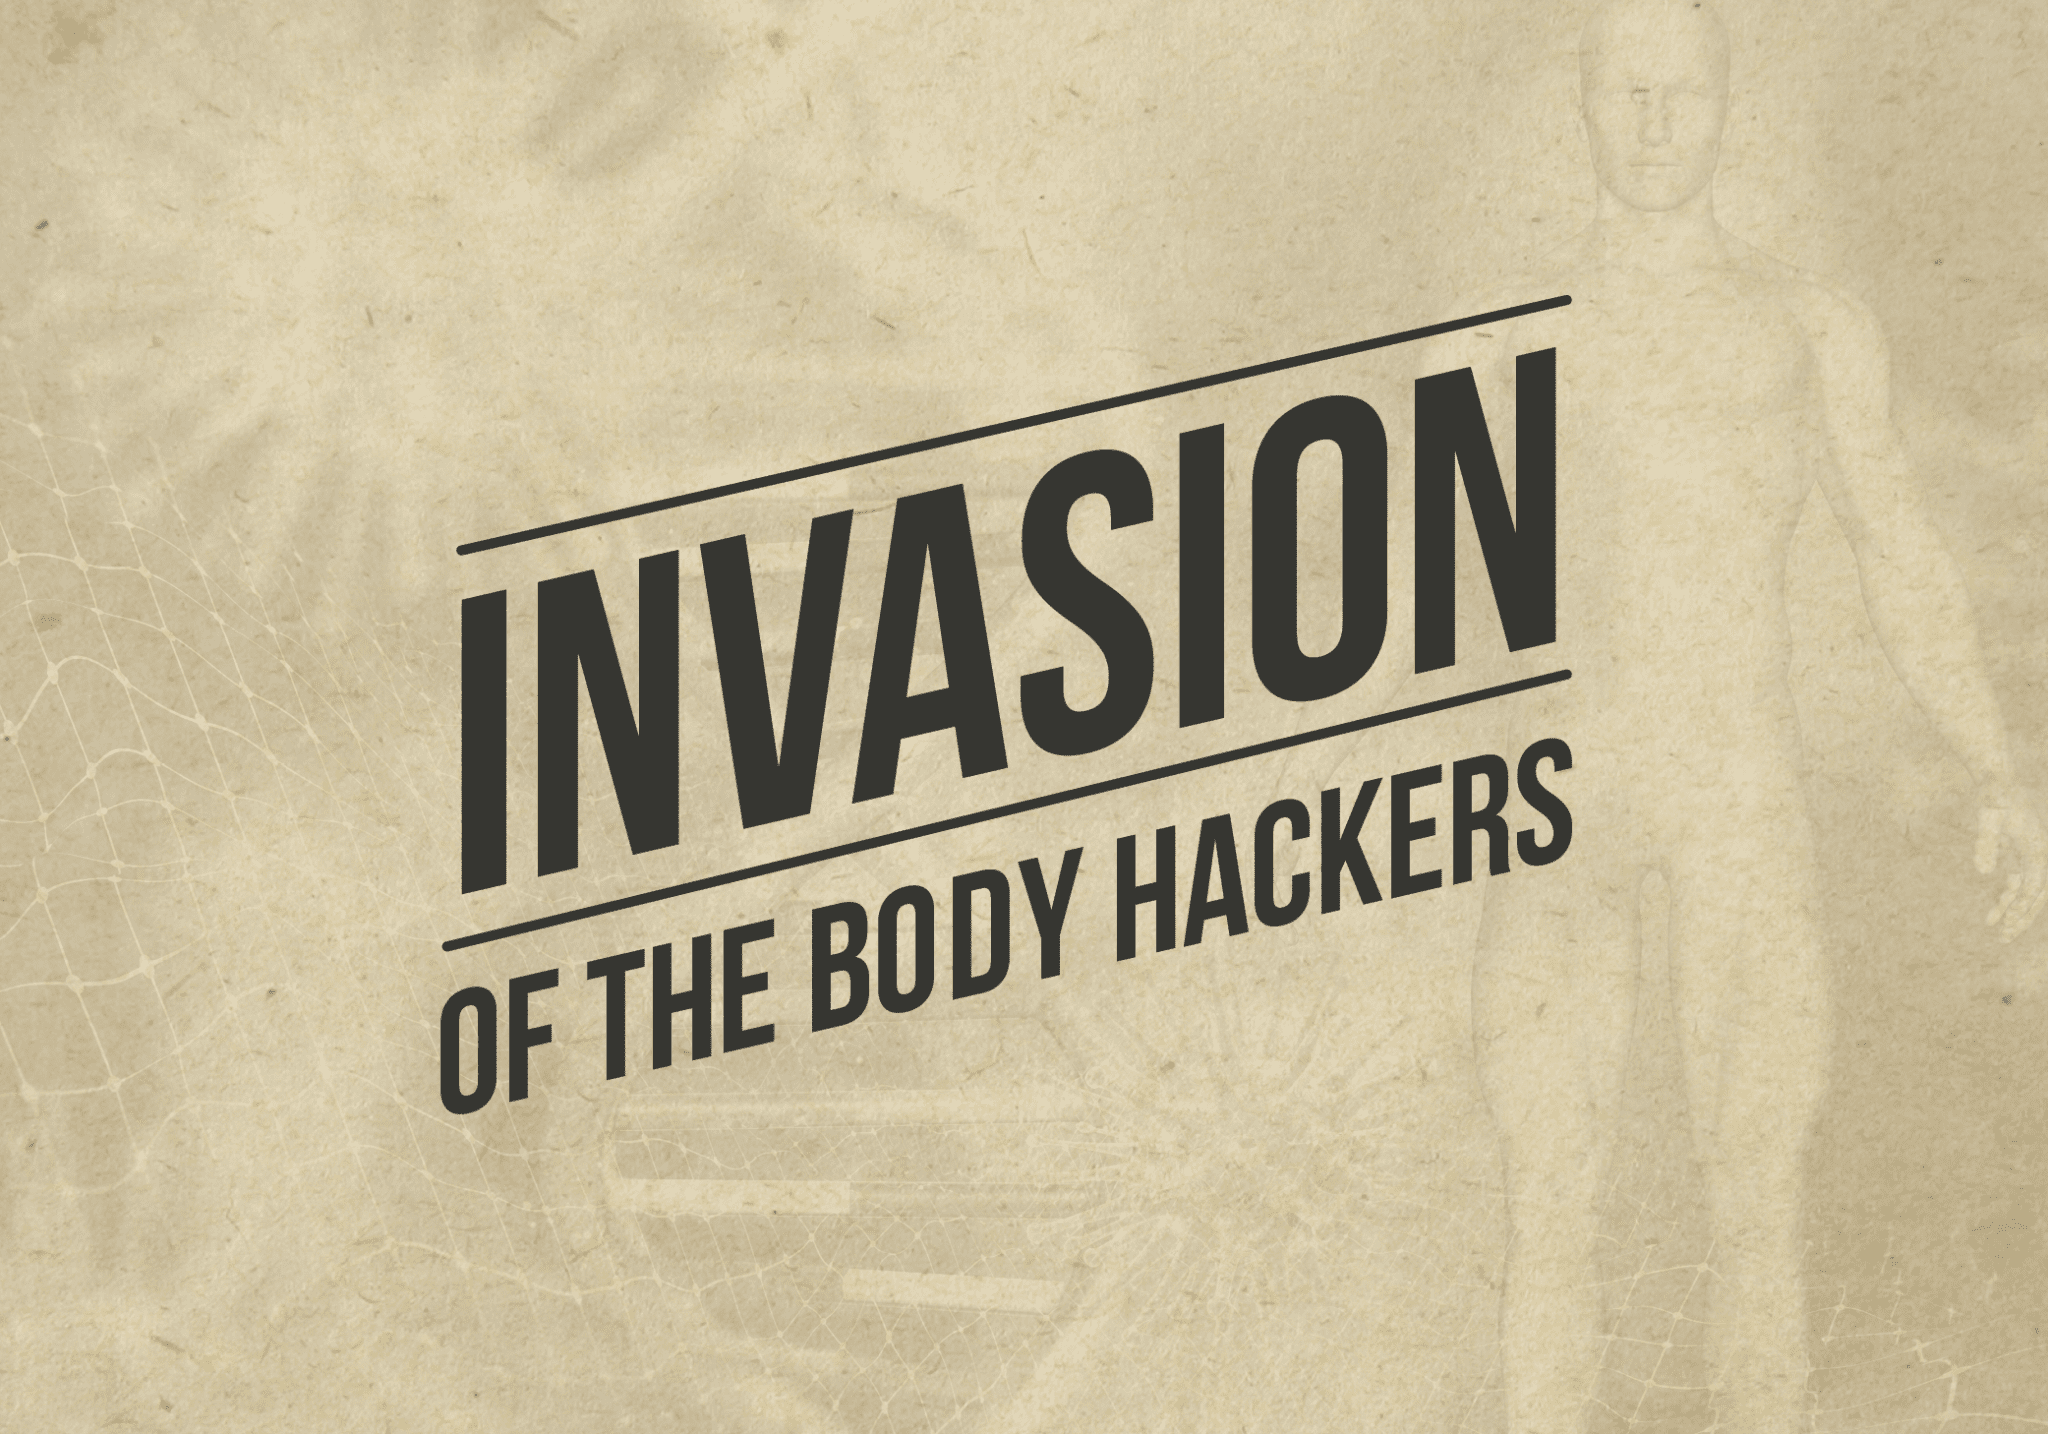 Invasion of the Body Hackers